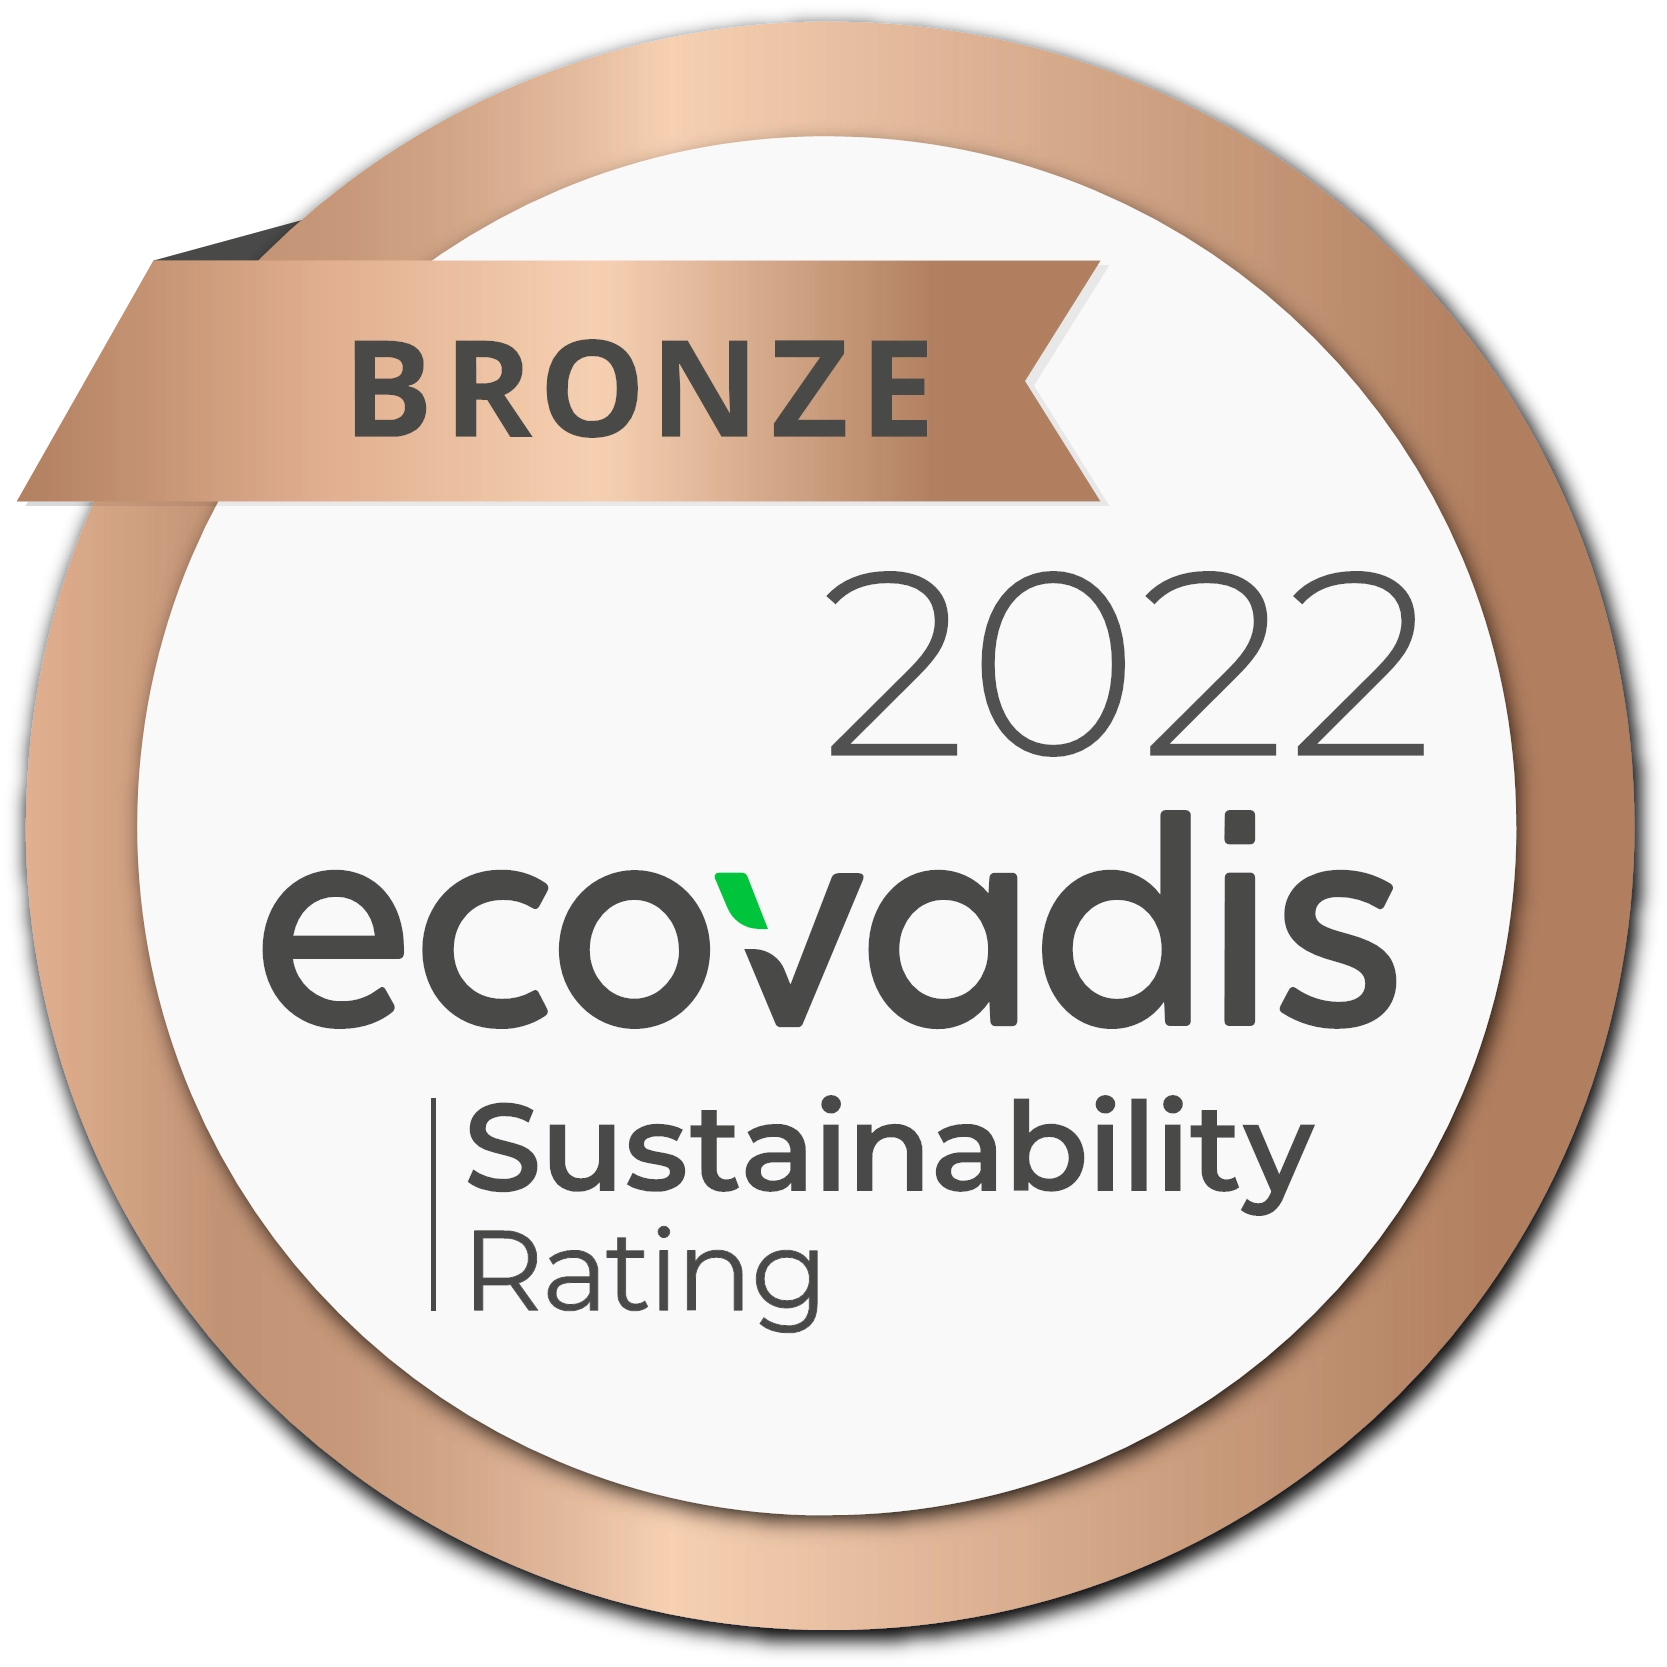 bronse medal as a recognition of our ecovadis rating